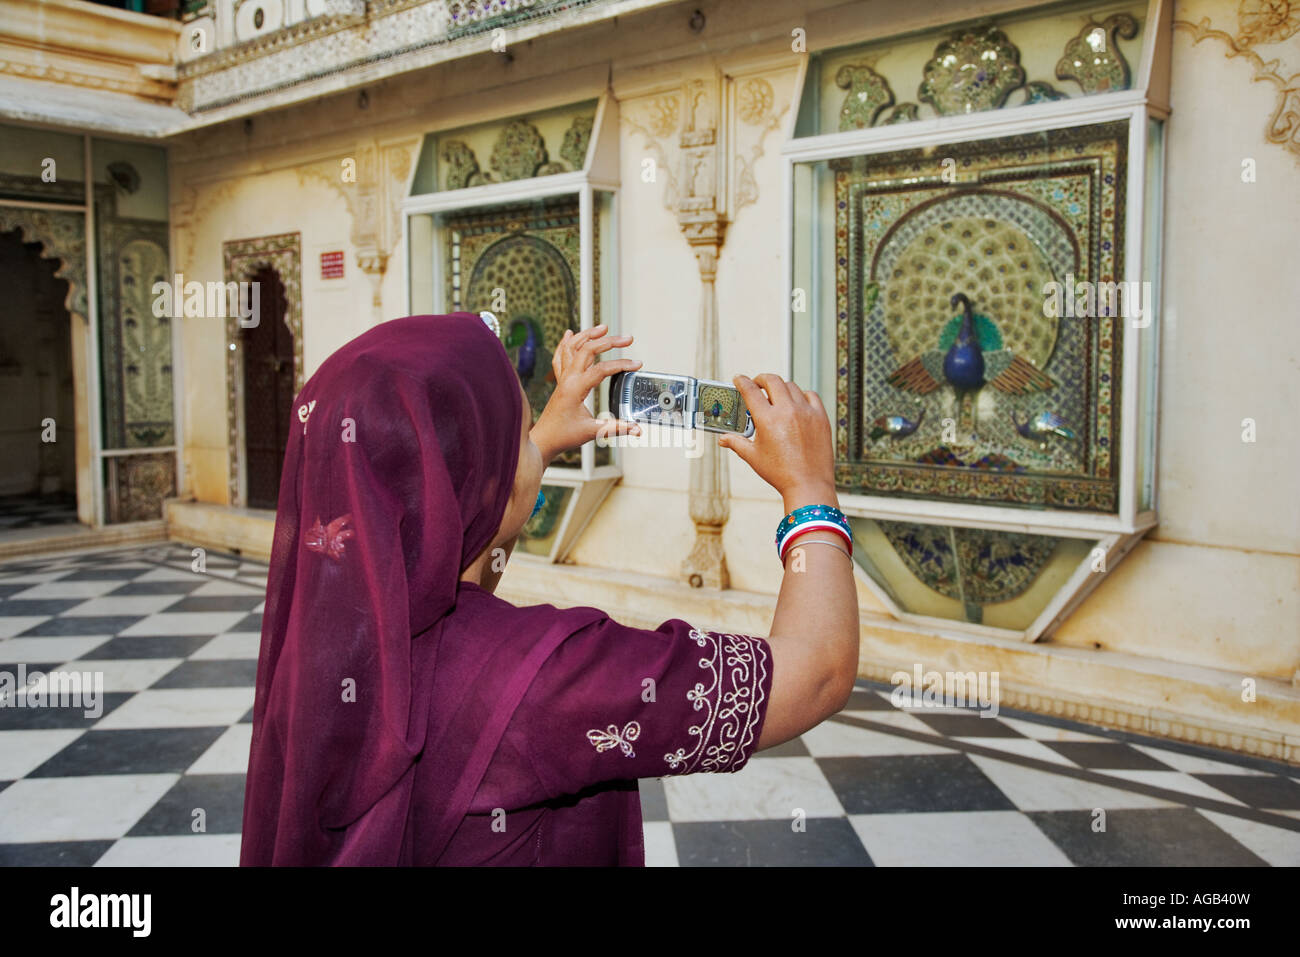 Indian woman in beautiful sari taking a picture in the City Palace Complex in Udaipur India Stock Photo